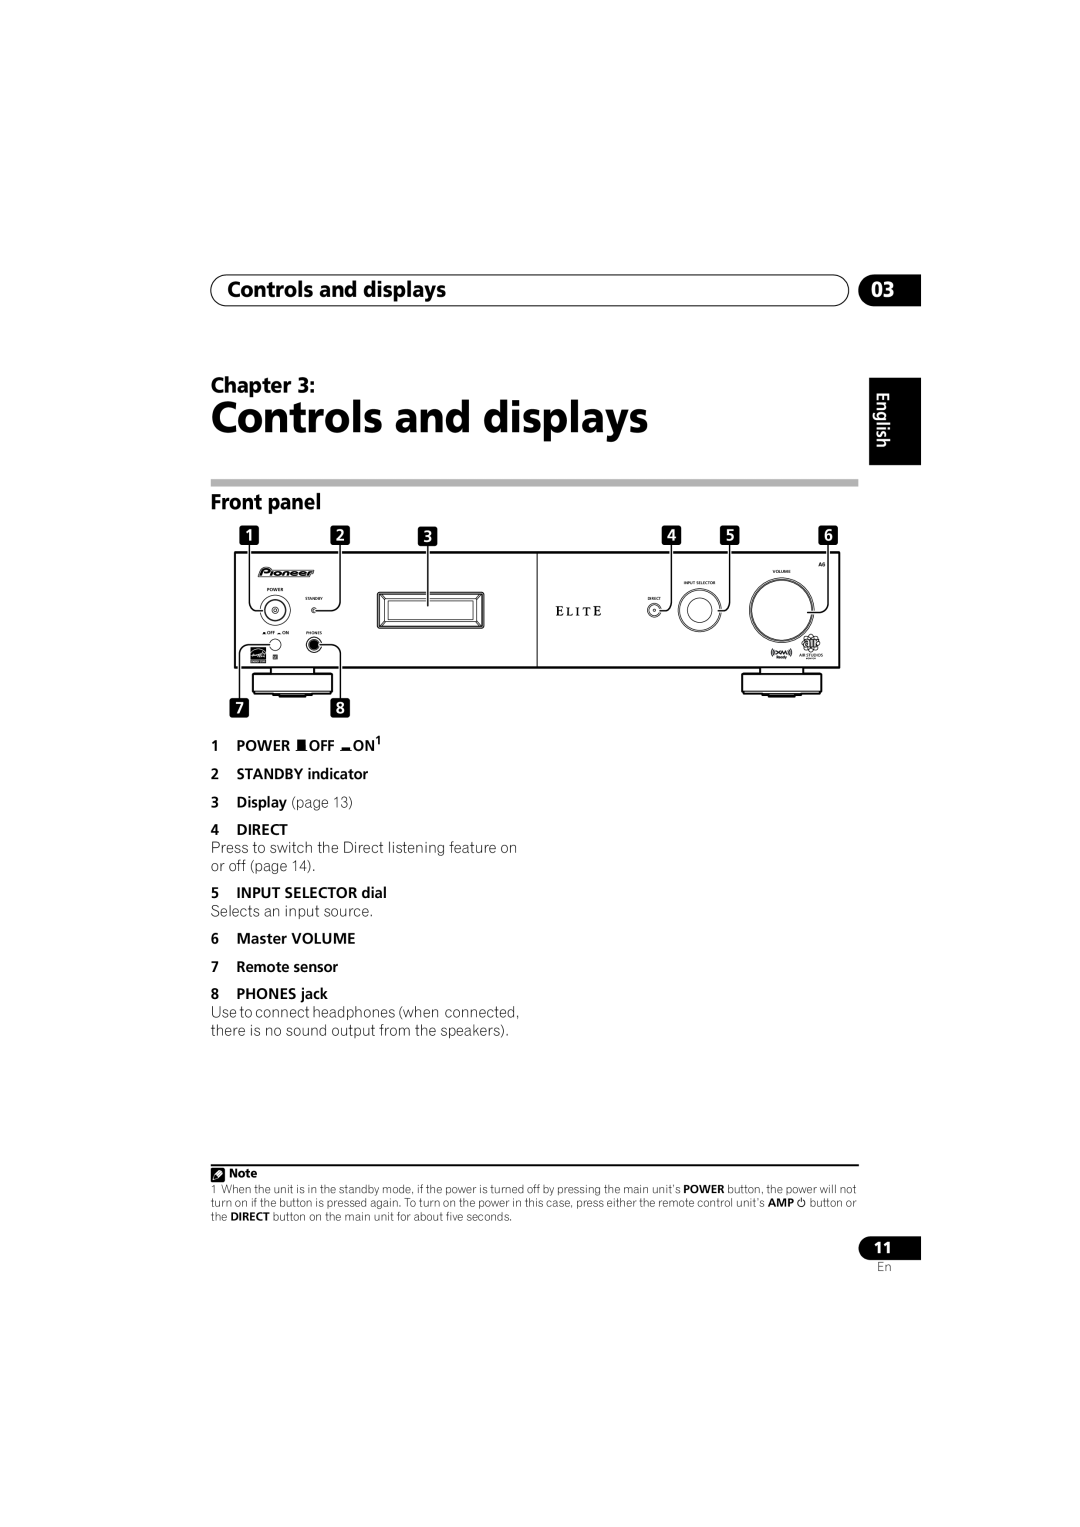 Pioneer SX-A6MK2-K Controls and displays Chapter, Front panel, English, 1POWER OFF ON1 2STANDBY indicator, 4DIRECT 